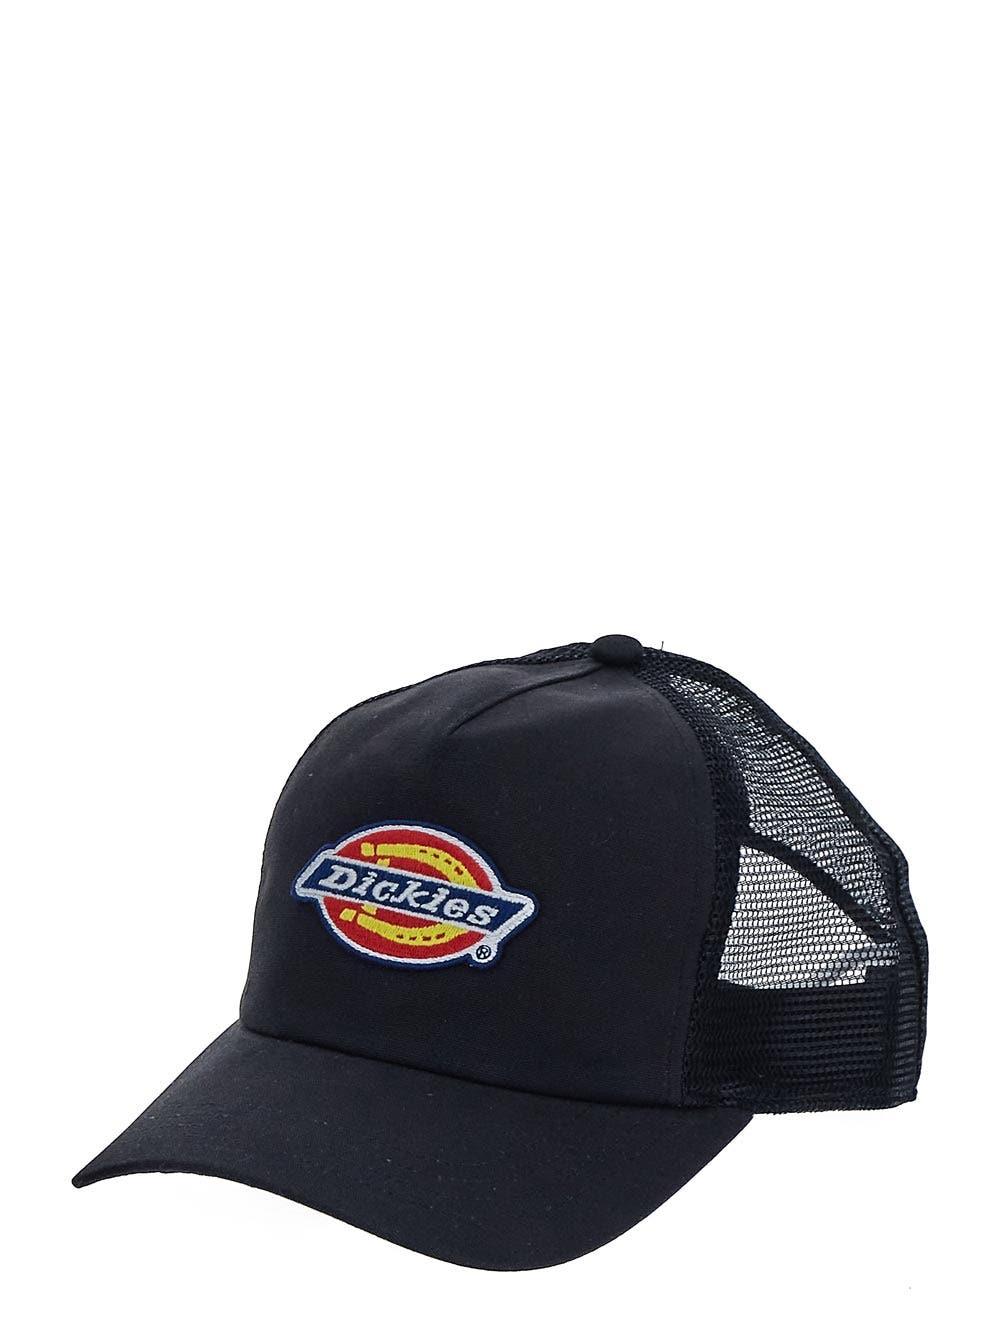 dickies trucker cap, super discount Save 67% available - www ...